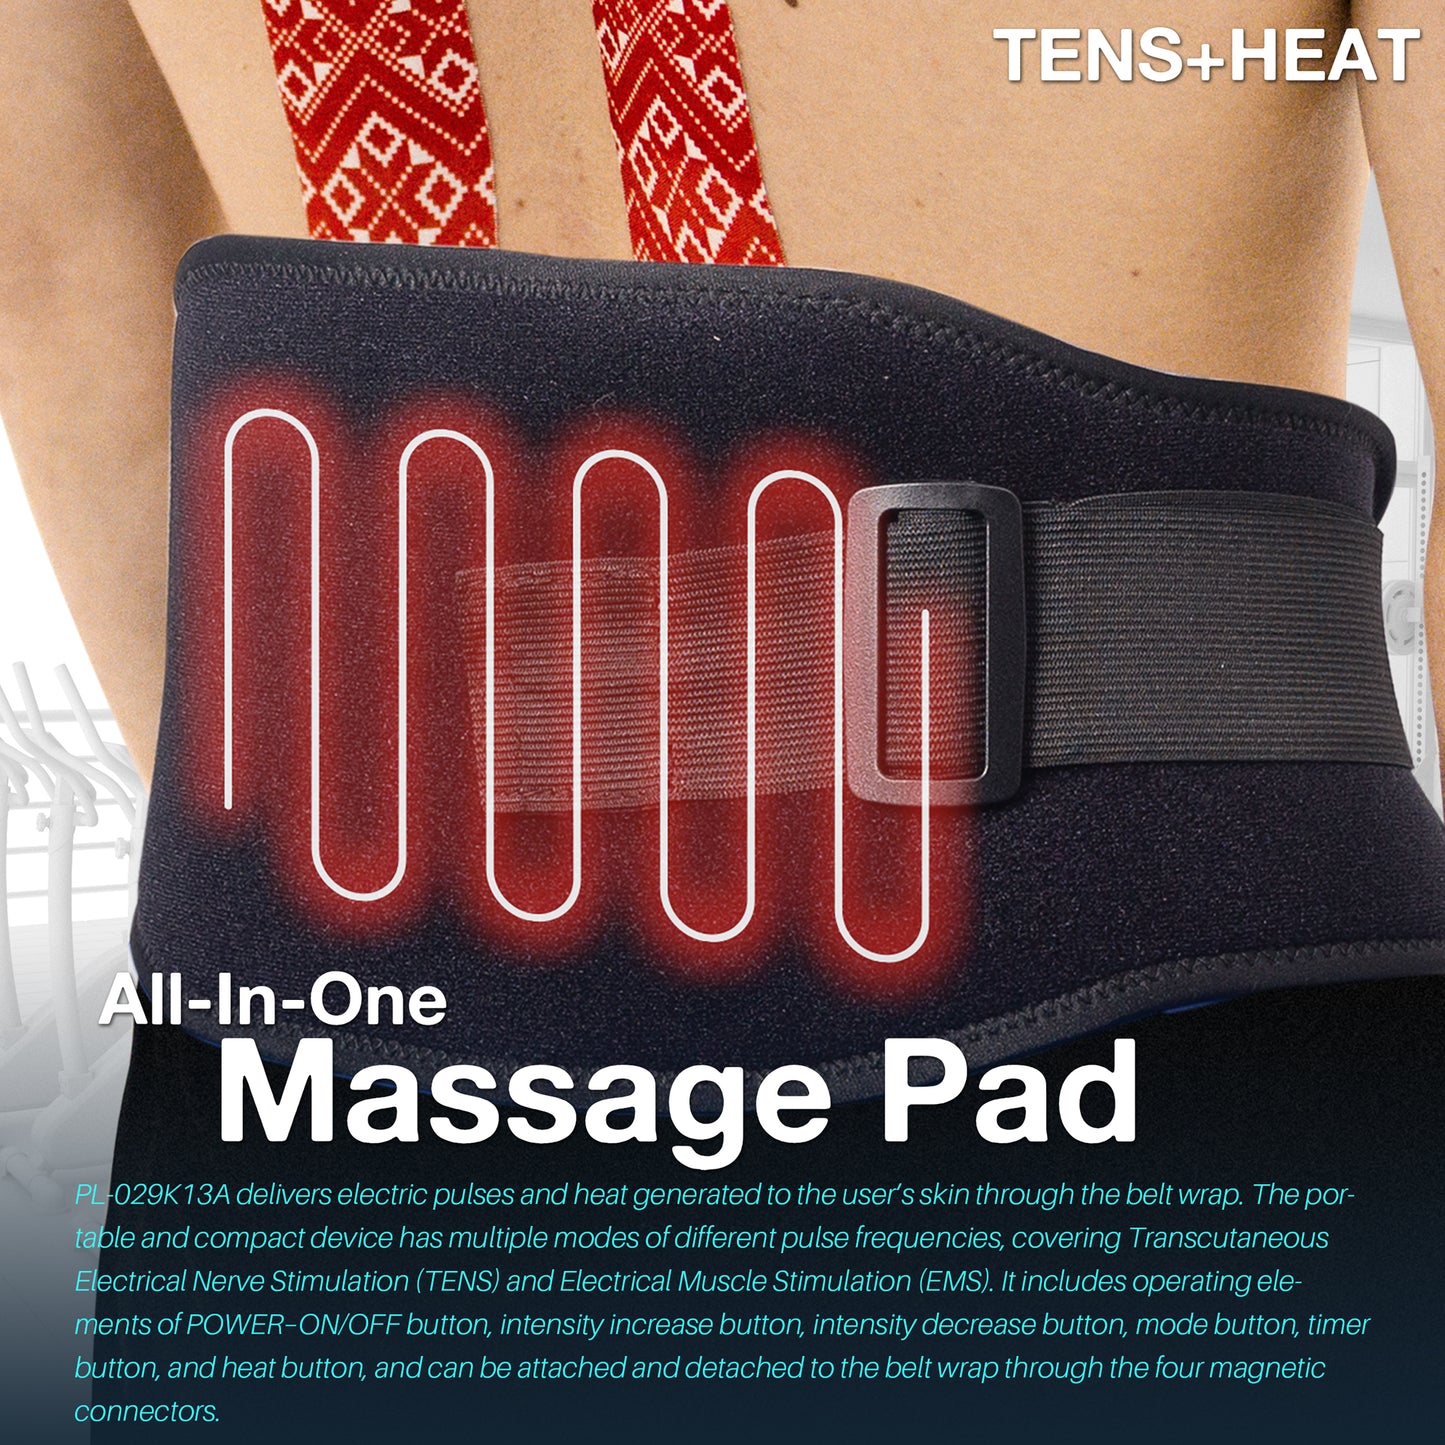 All-in-One TENS Massage Pad